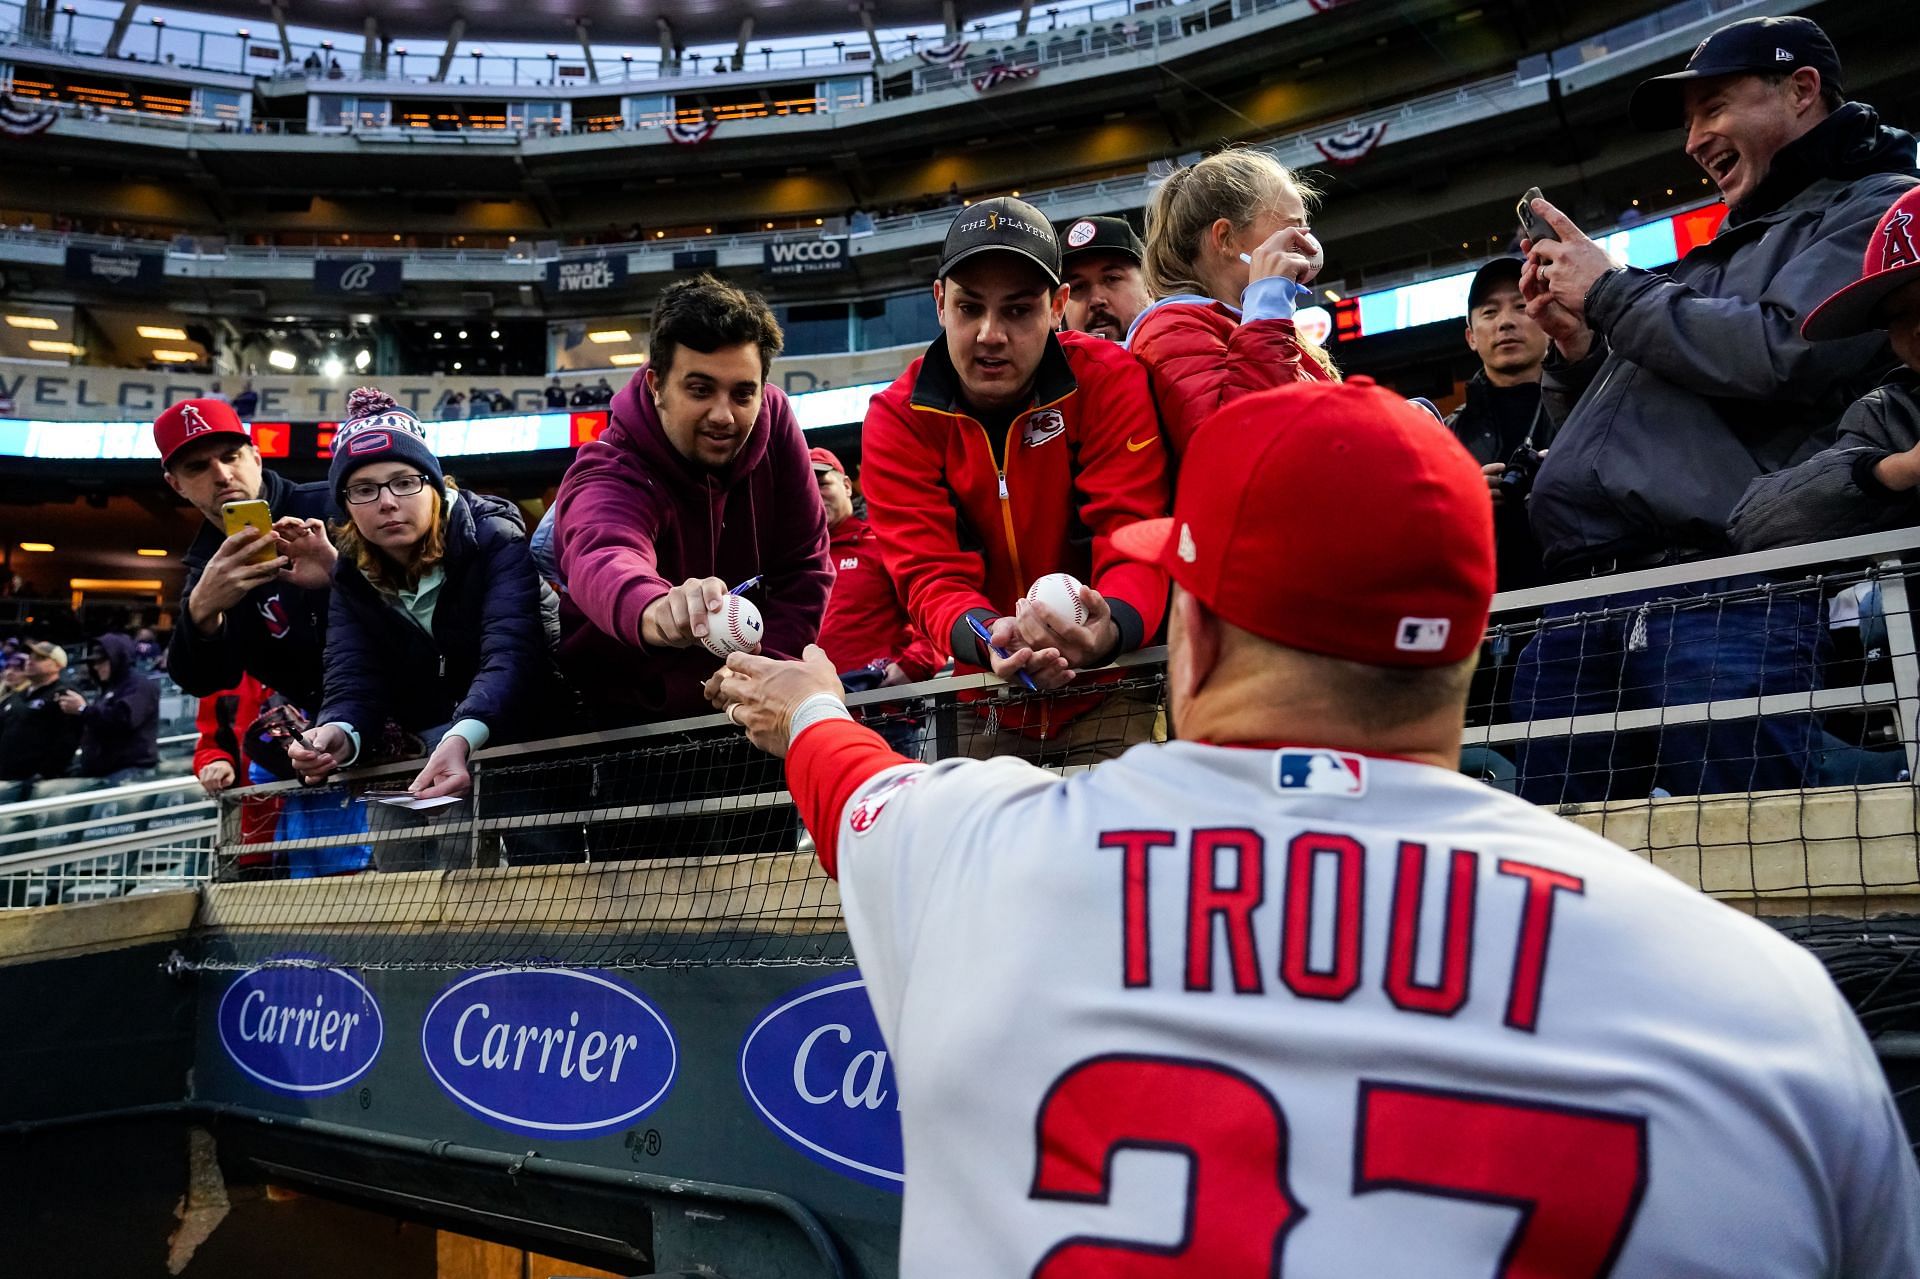 Mike Trout of the Los Angeles Angels signs autographs for fans at Target Field in Minneapolis, Minnesota